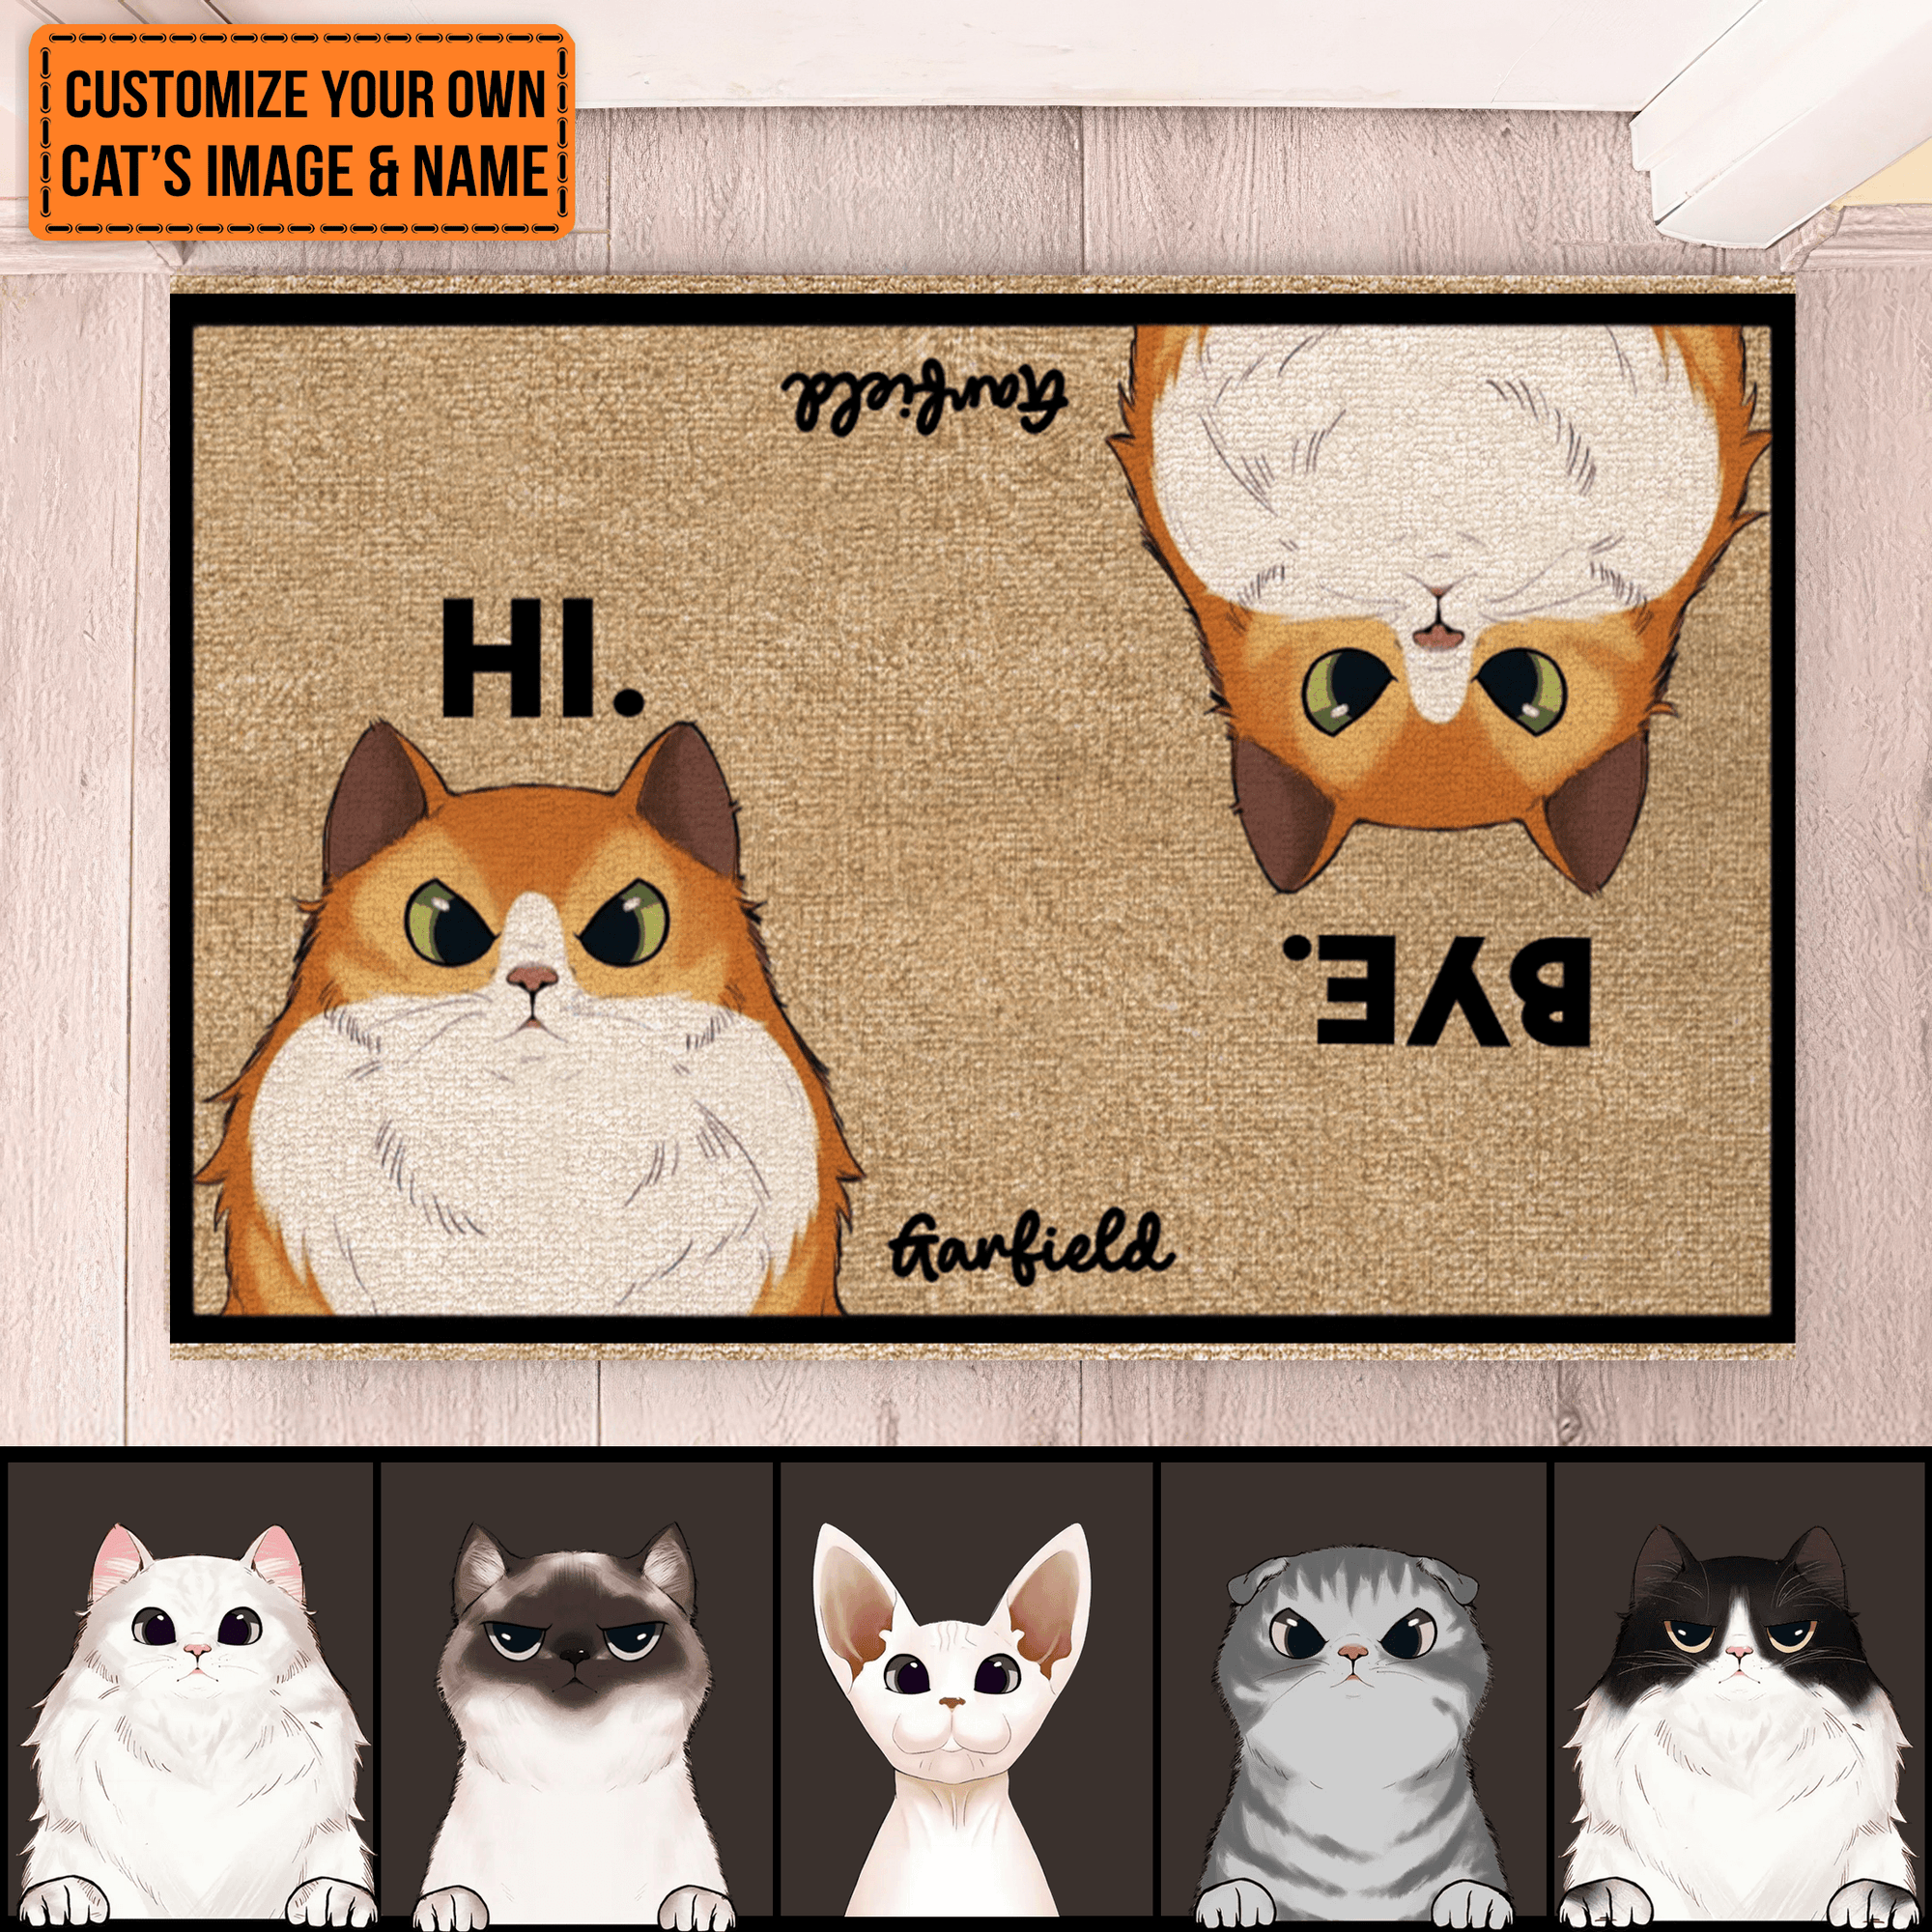 Pet Cat Hi and Bye Funny Doormat - Personalized Doormat - Birthday, Housewarming, Funny Gift for Homeowners, Friends, Dog Mom, Dog Dad, Dog Lovers, Pet Gifts for Him, Her